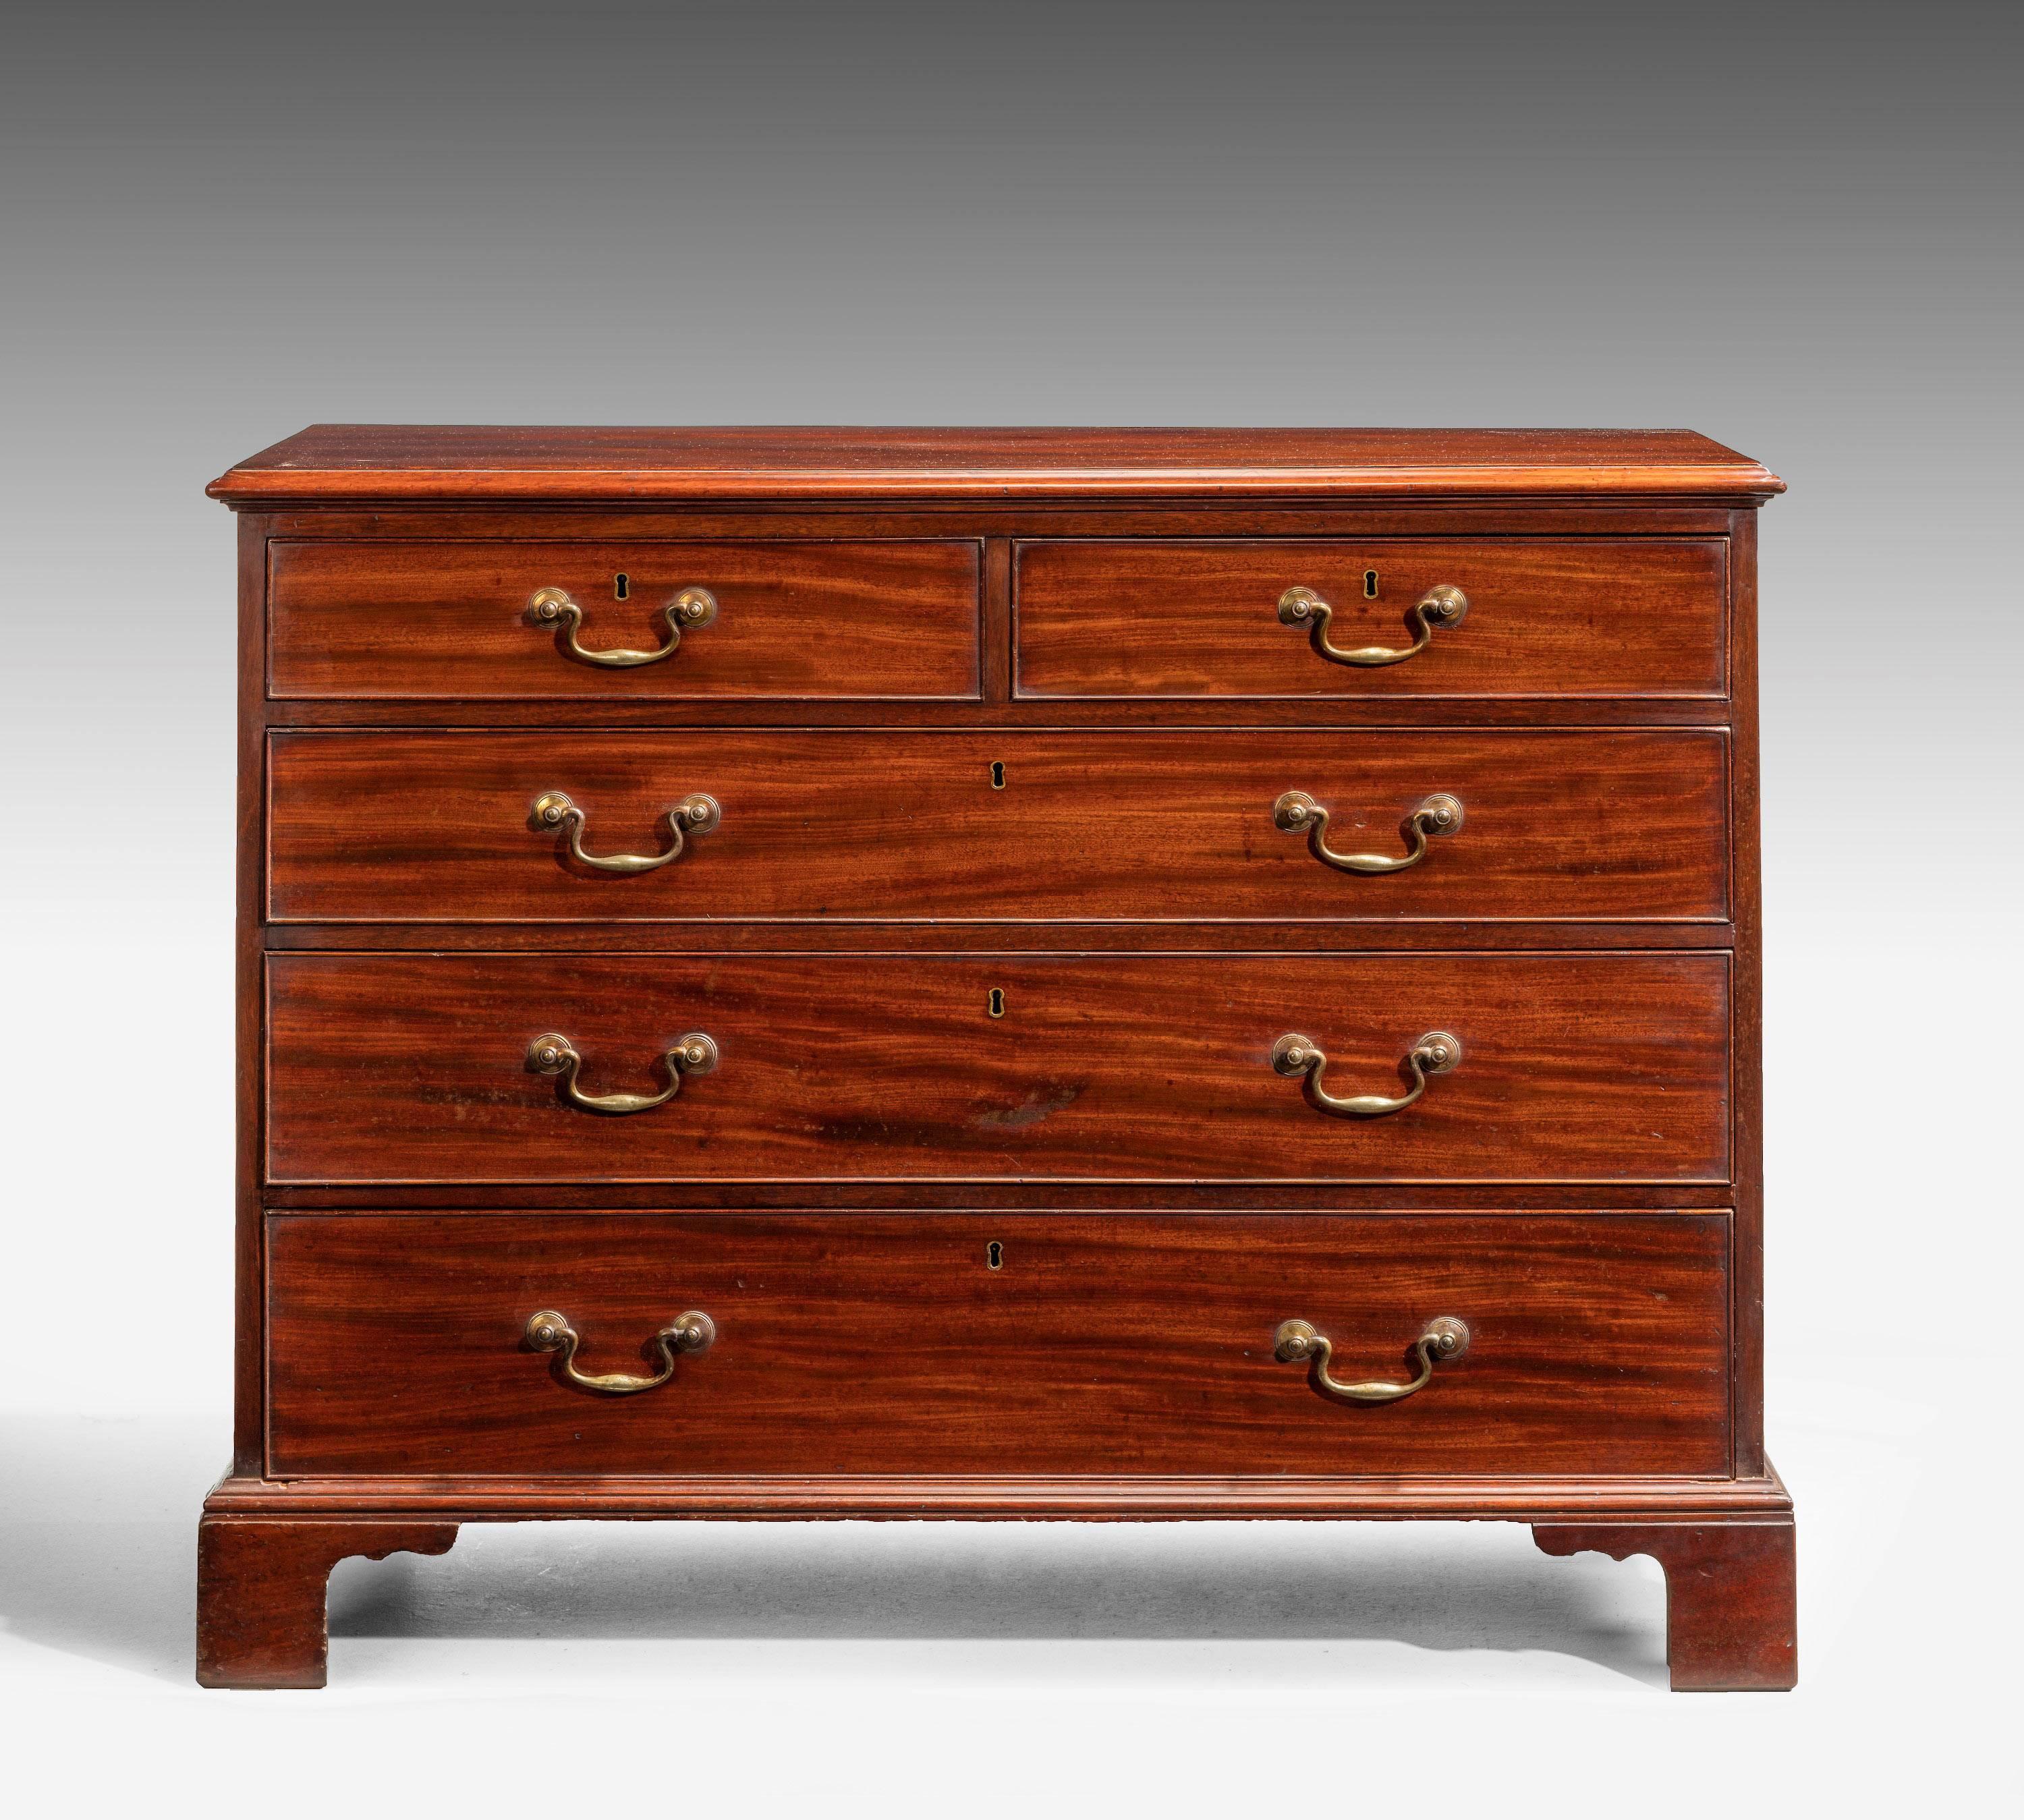 A good George III mahogany chest of drawers with fine quality and original cast swan neck handles. Fine oak linings to the drawers and original bracket feet.

RR